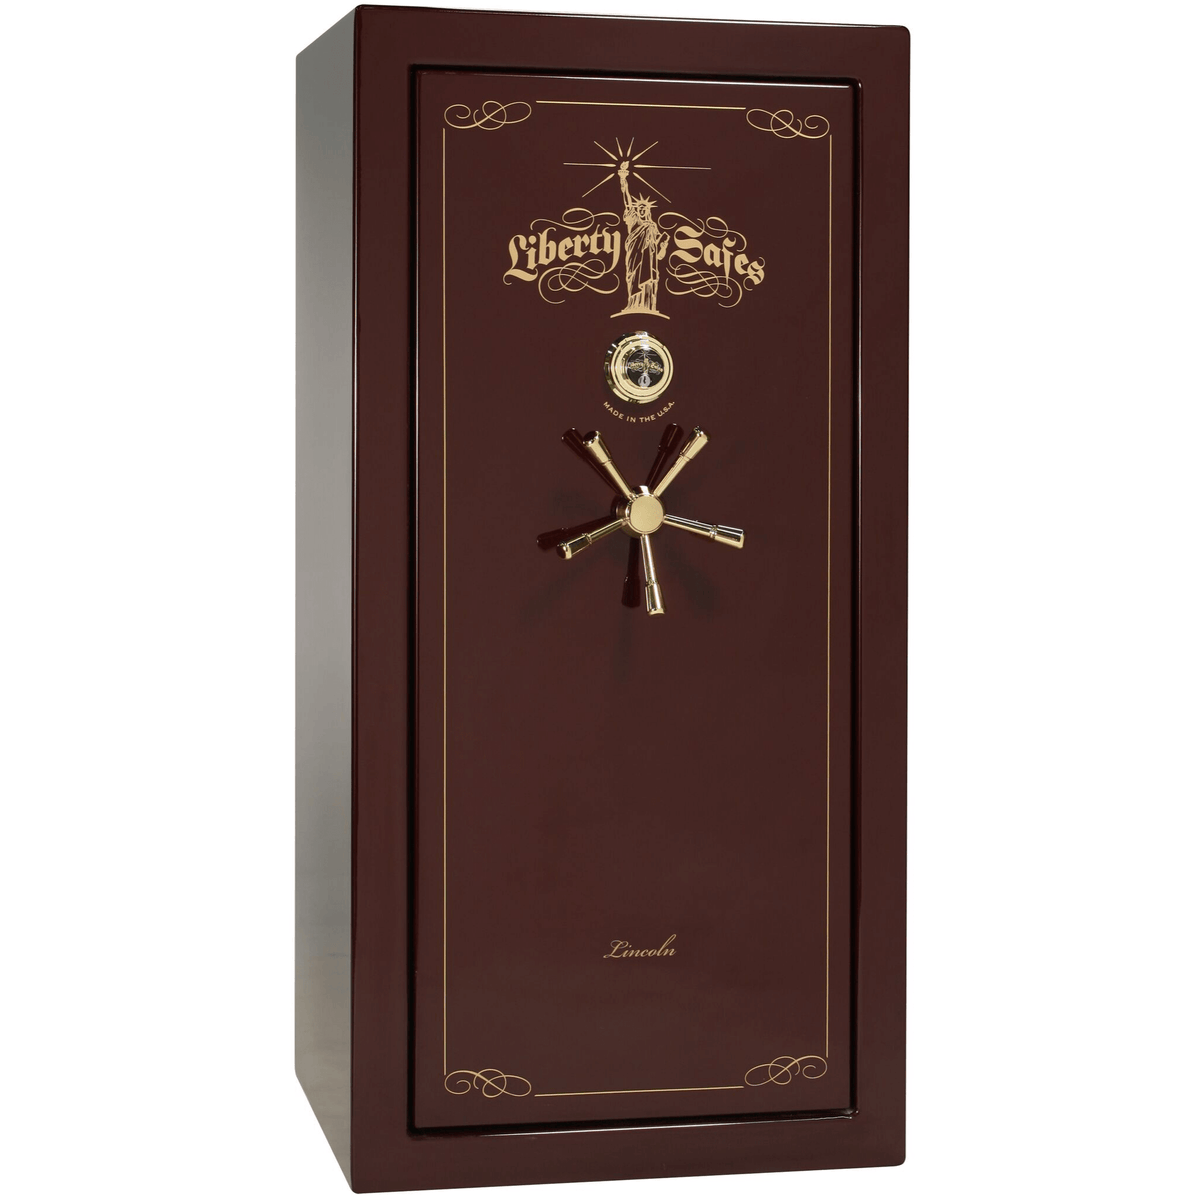 Liberty Lincoln 25 Safe in Burgundy Gloss with Brass Mechanical Lock.